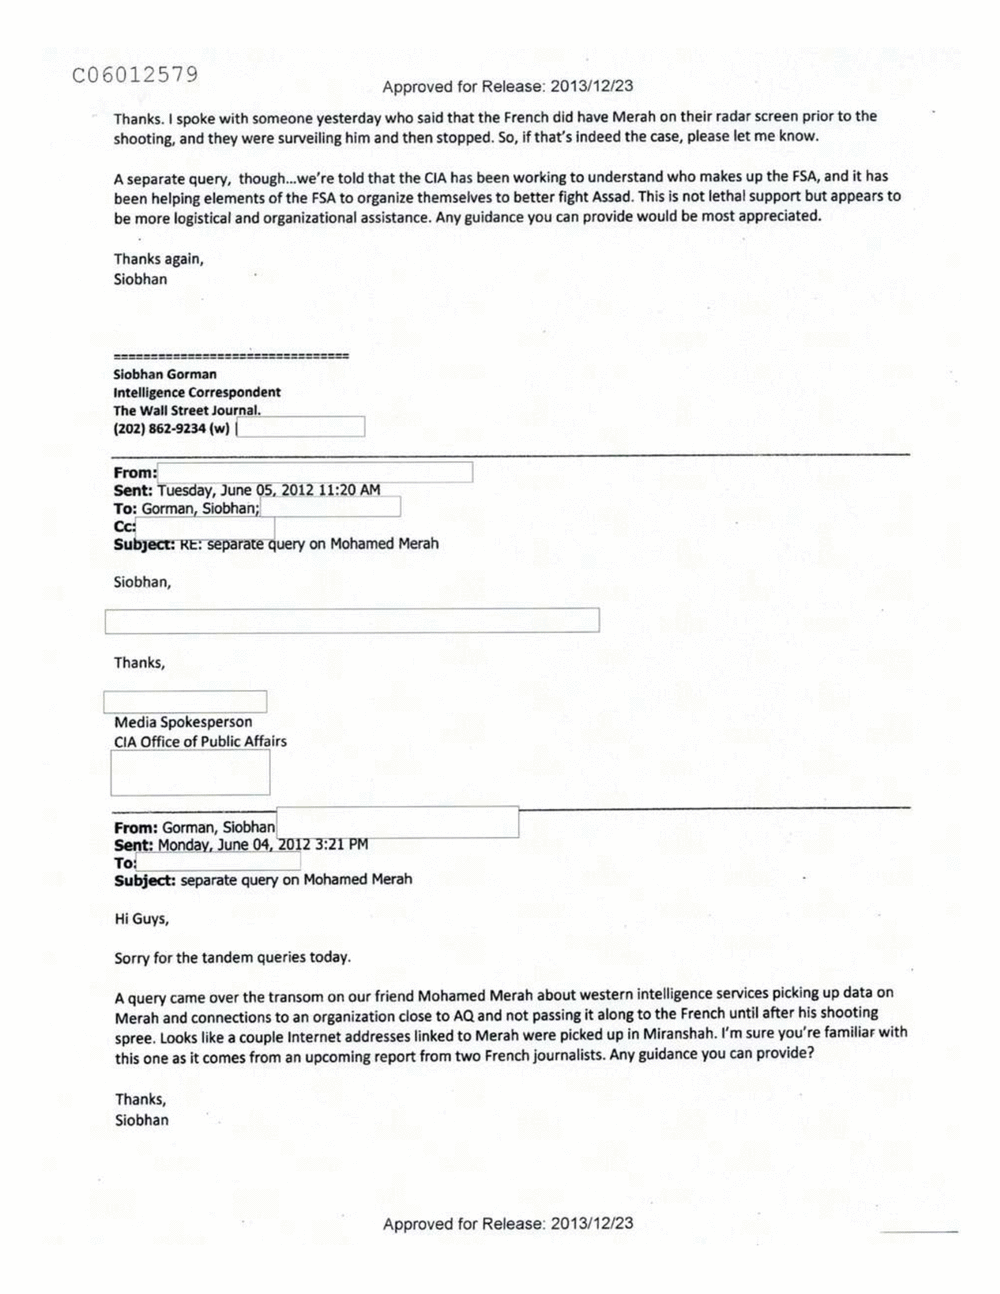 Page 116 from Email Correspondence Between Reporters and CIA Flacks